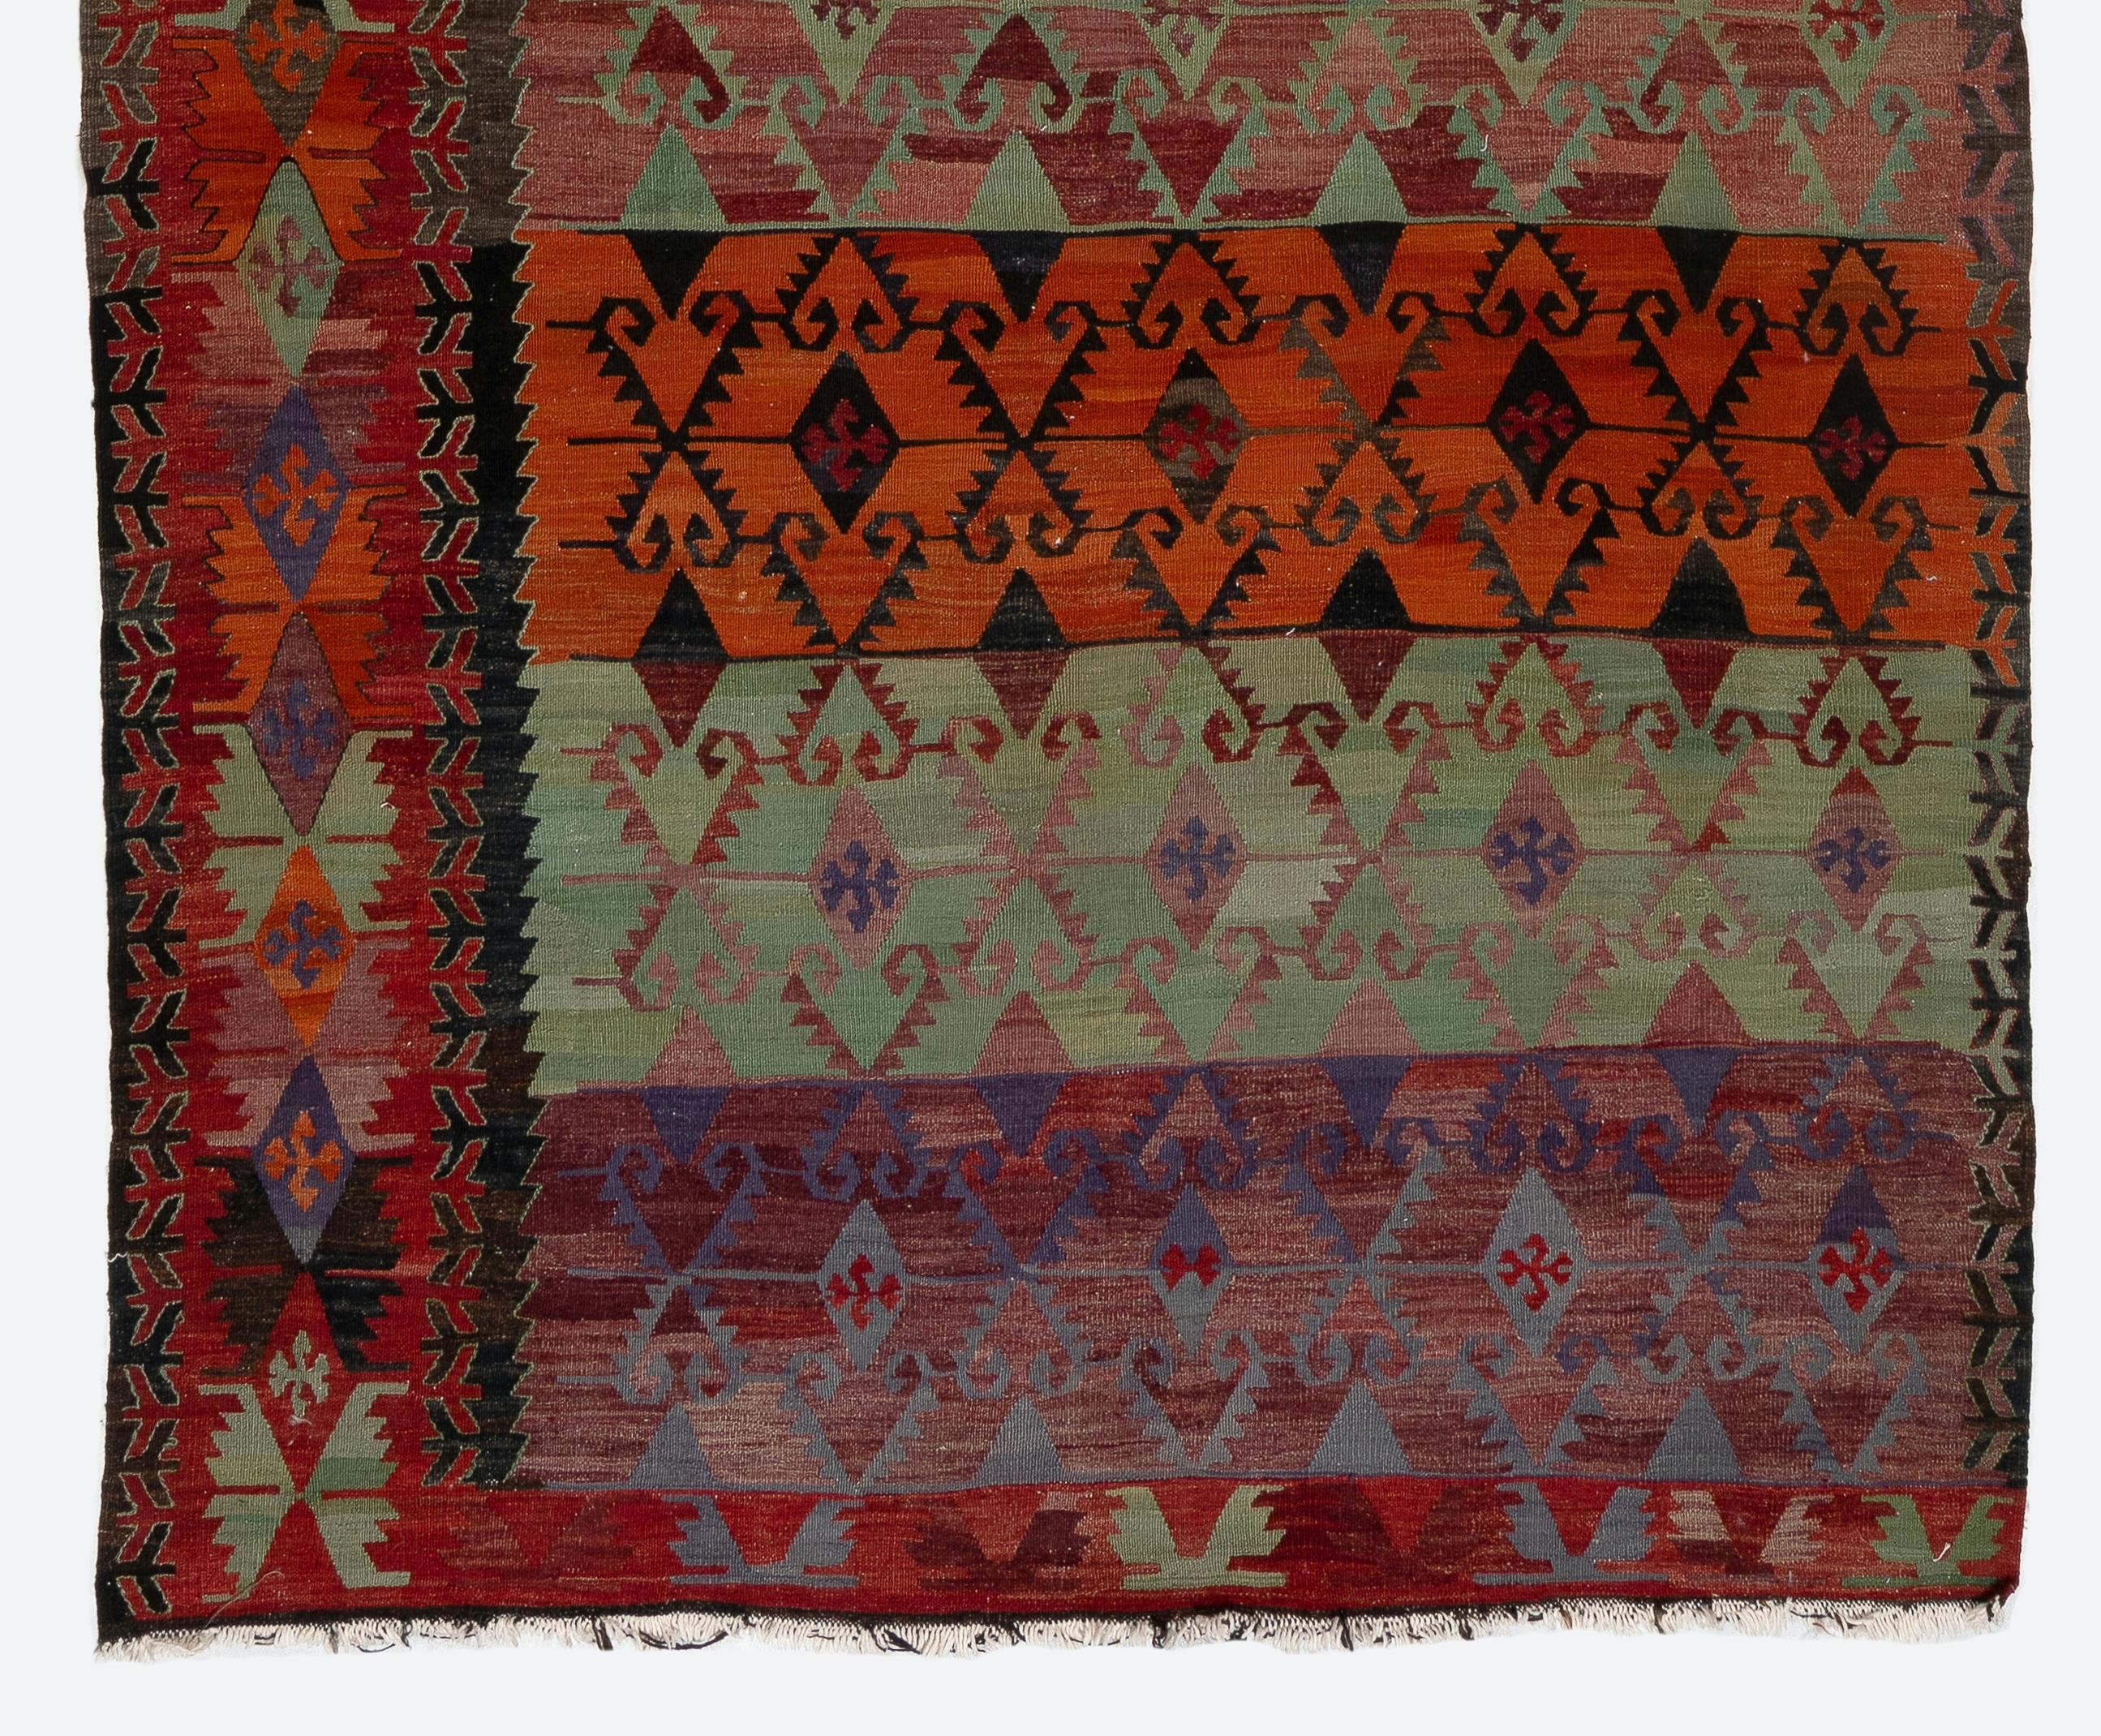 Hand-Woven 5.2x13.2 Ft Rare Vintage Anatolian Kilim, FlatWoven Floor Covering, Colorful Rug For Sale